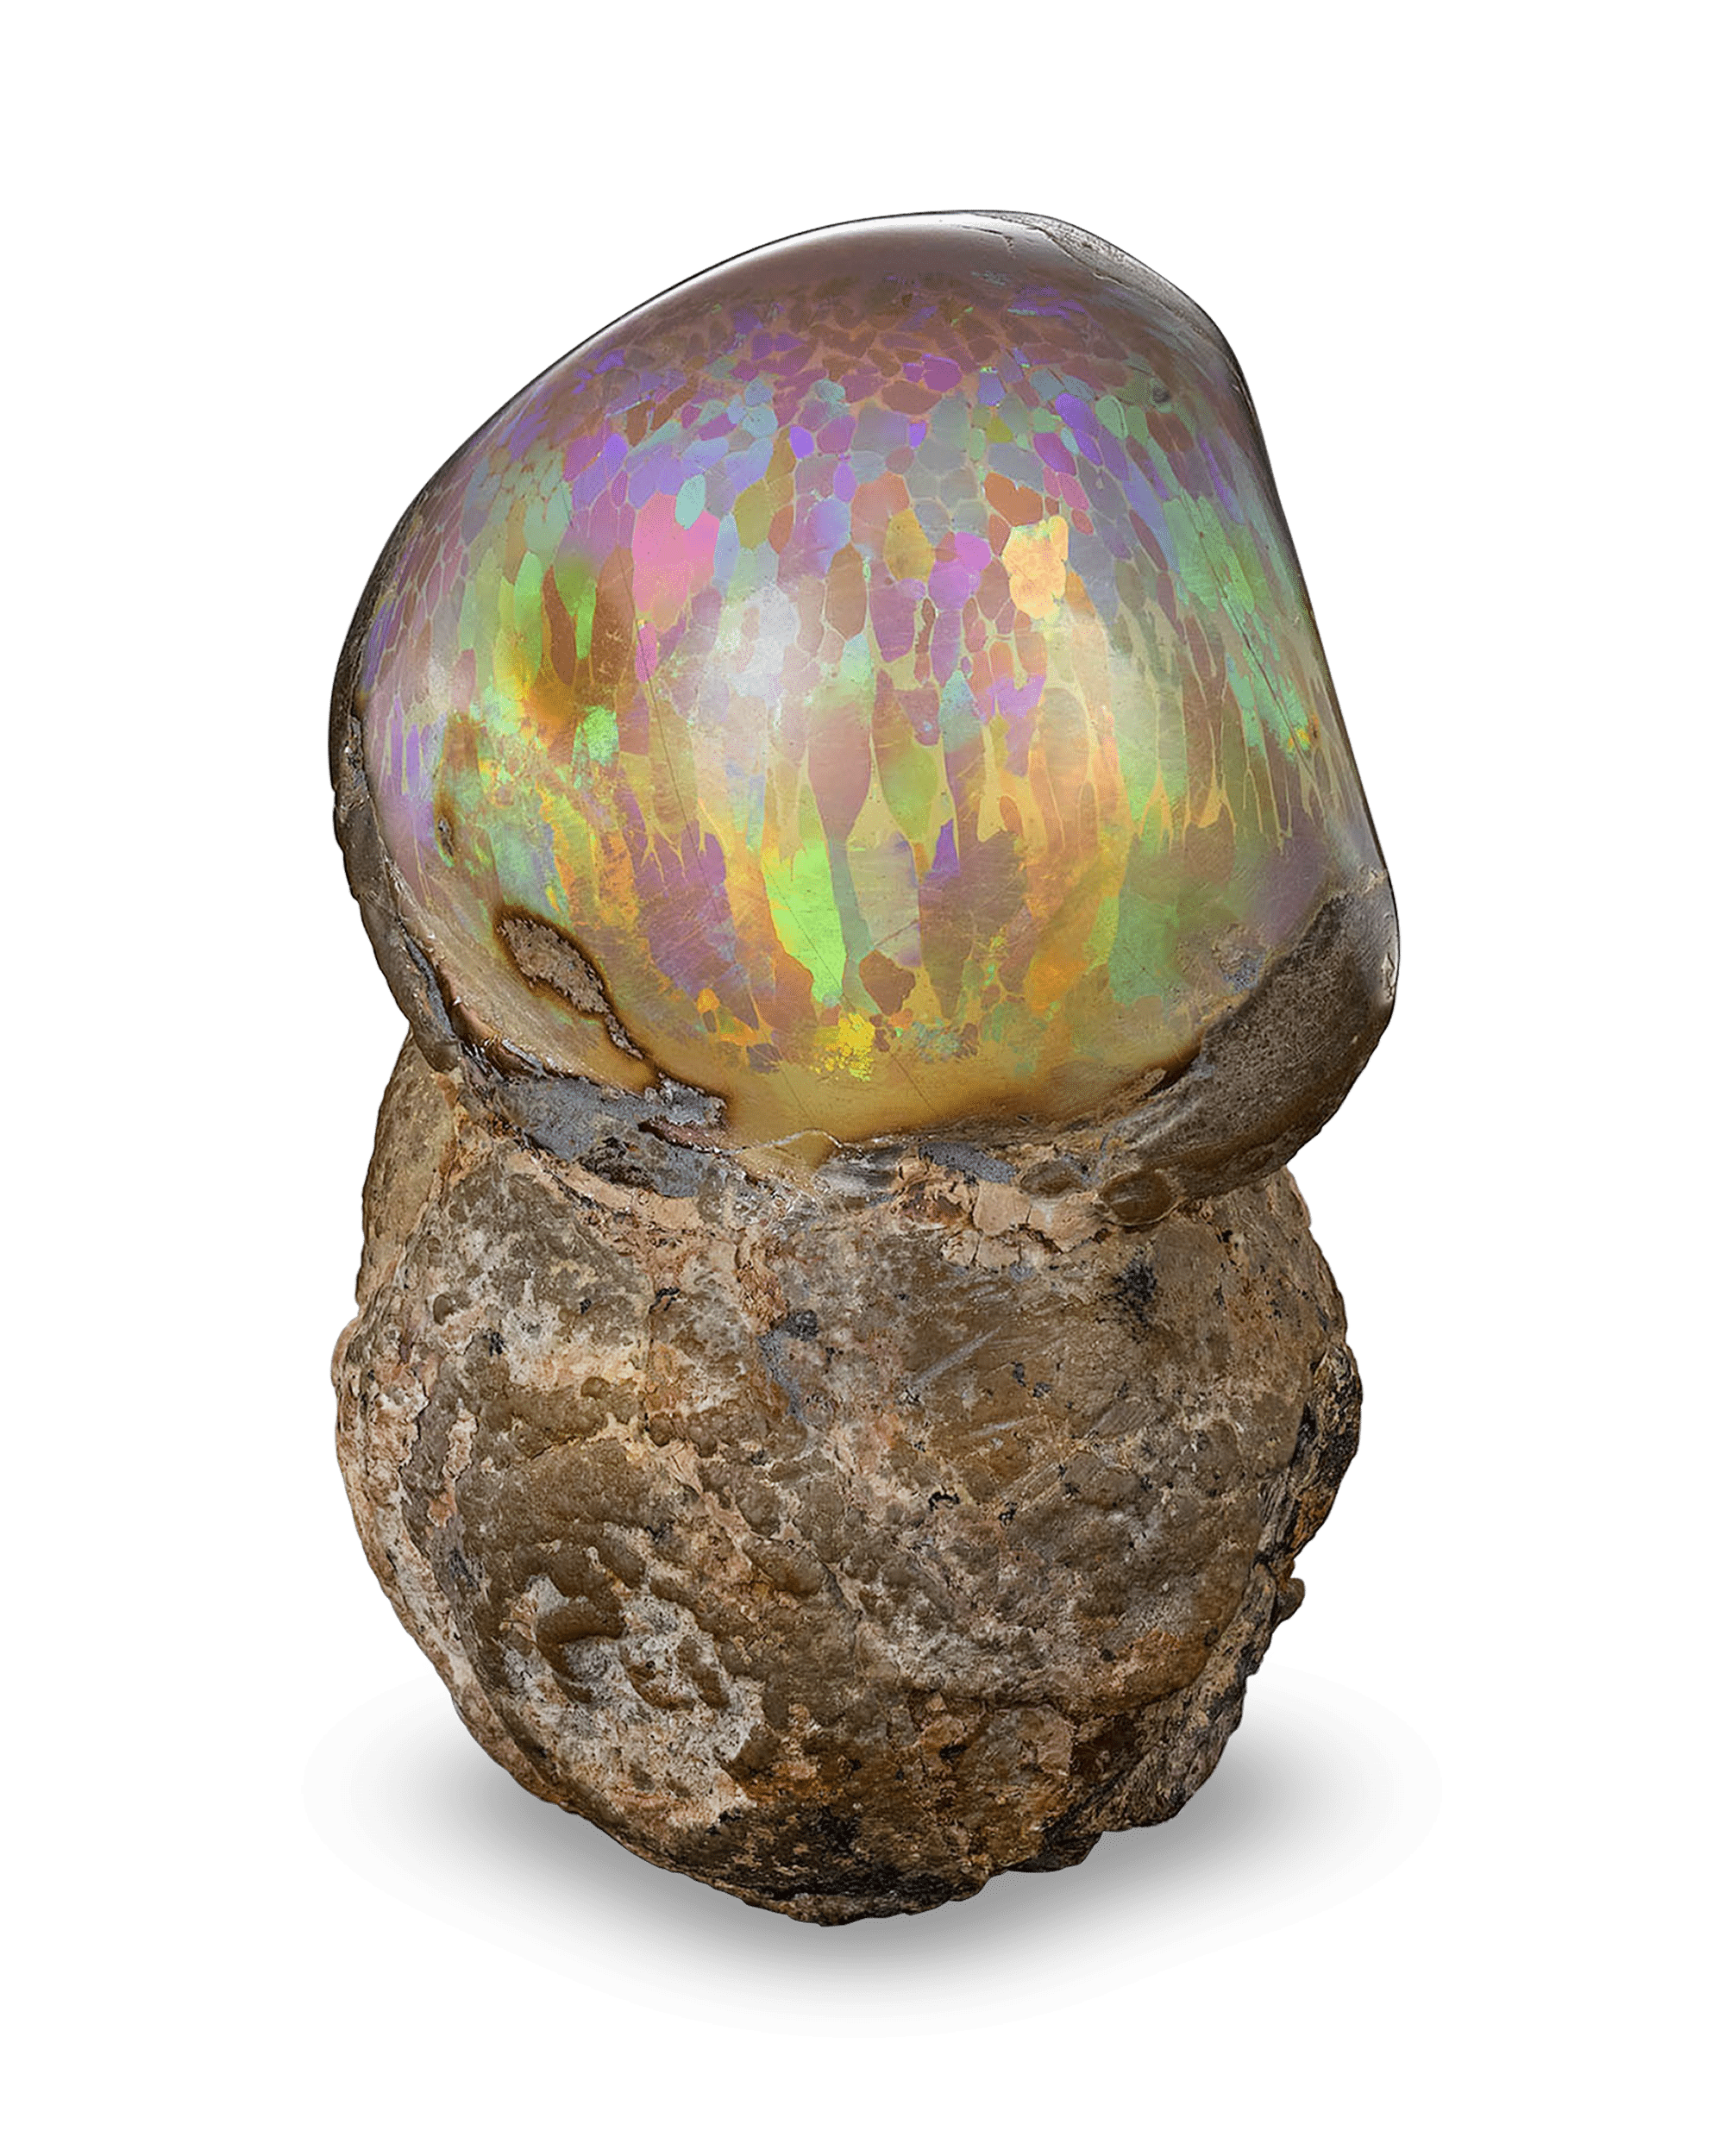 This rare Ethiopian opal specimen displays an extraordinary array of colors